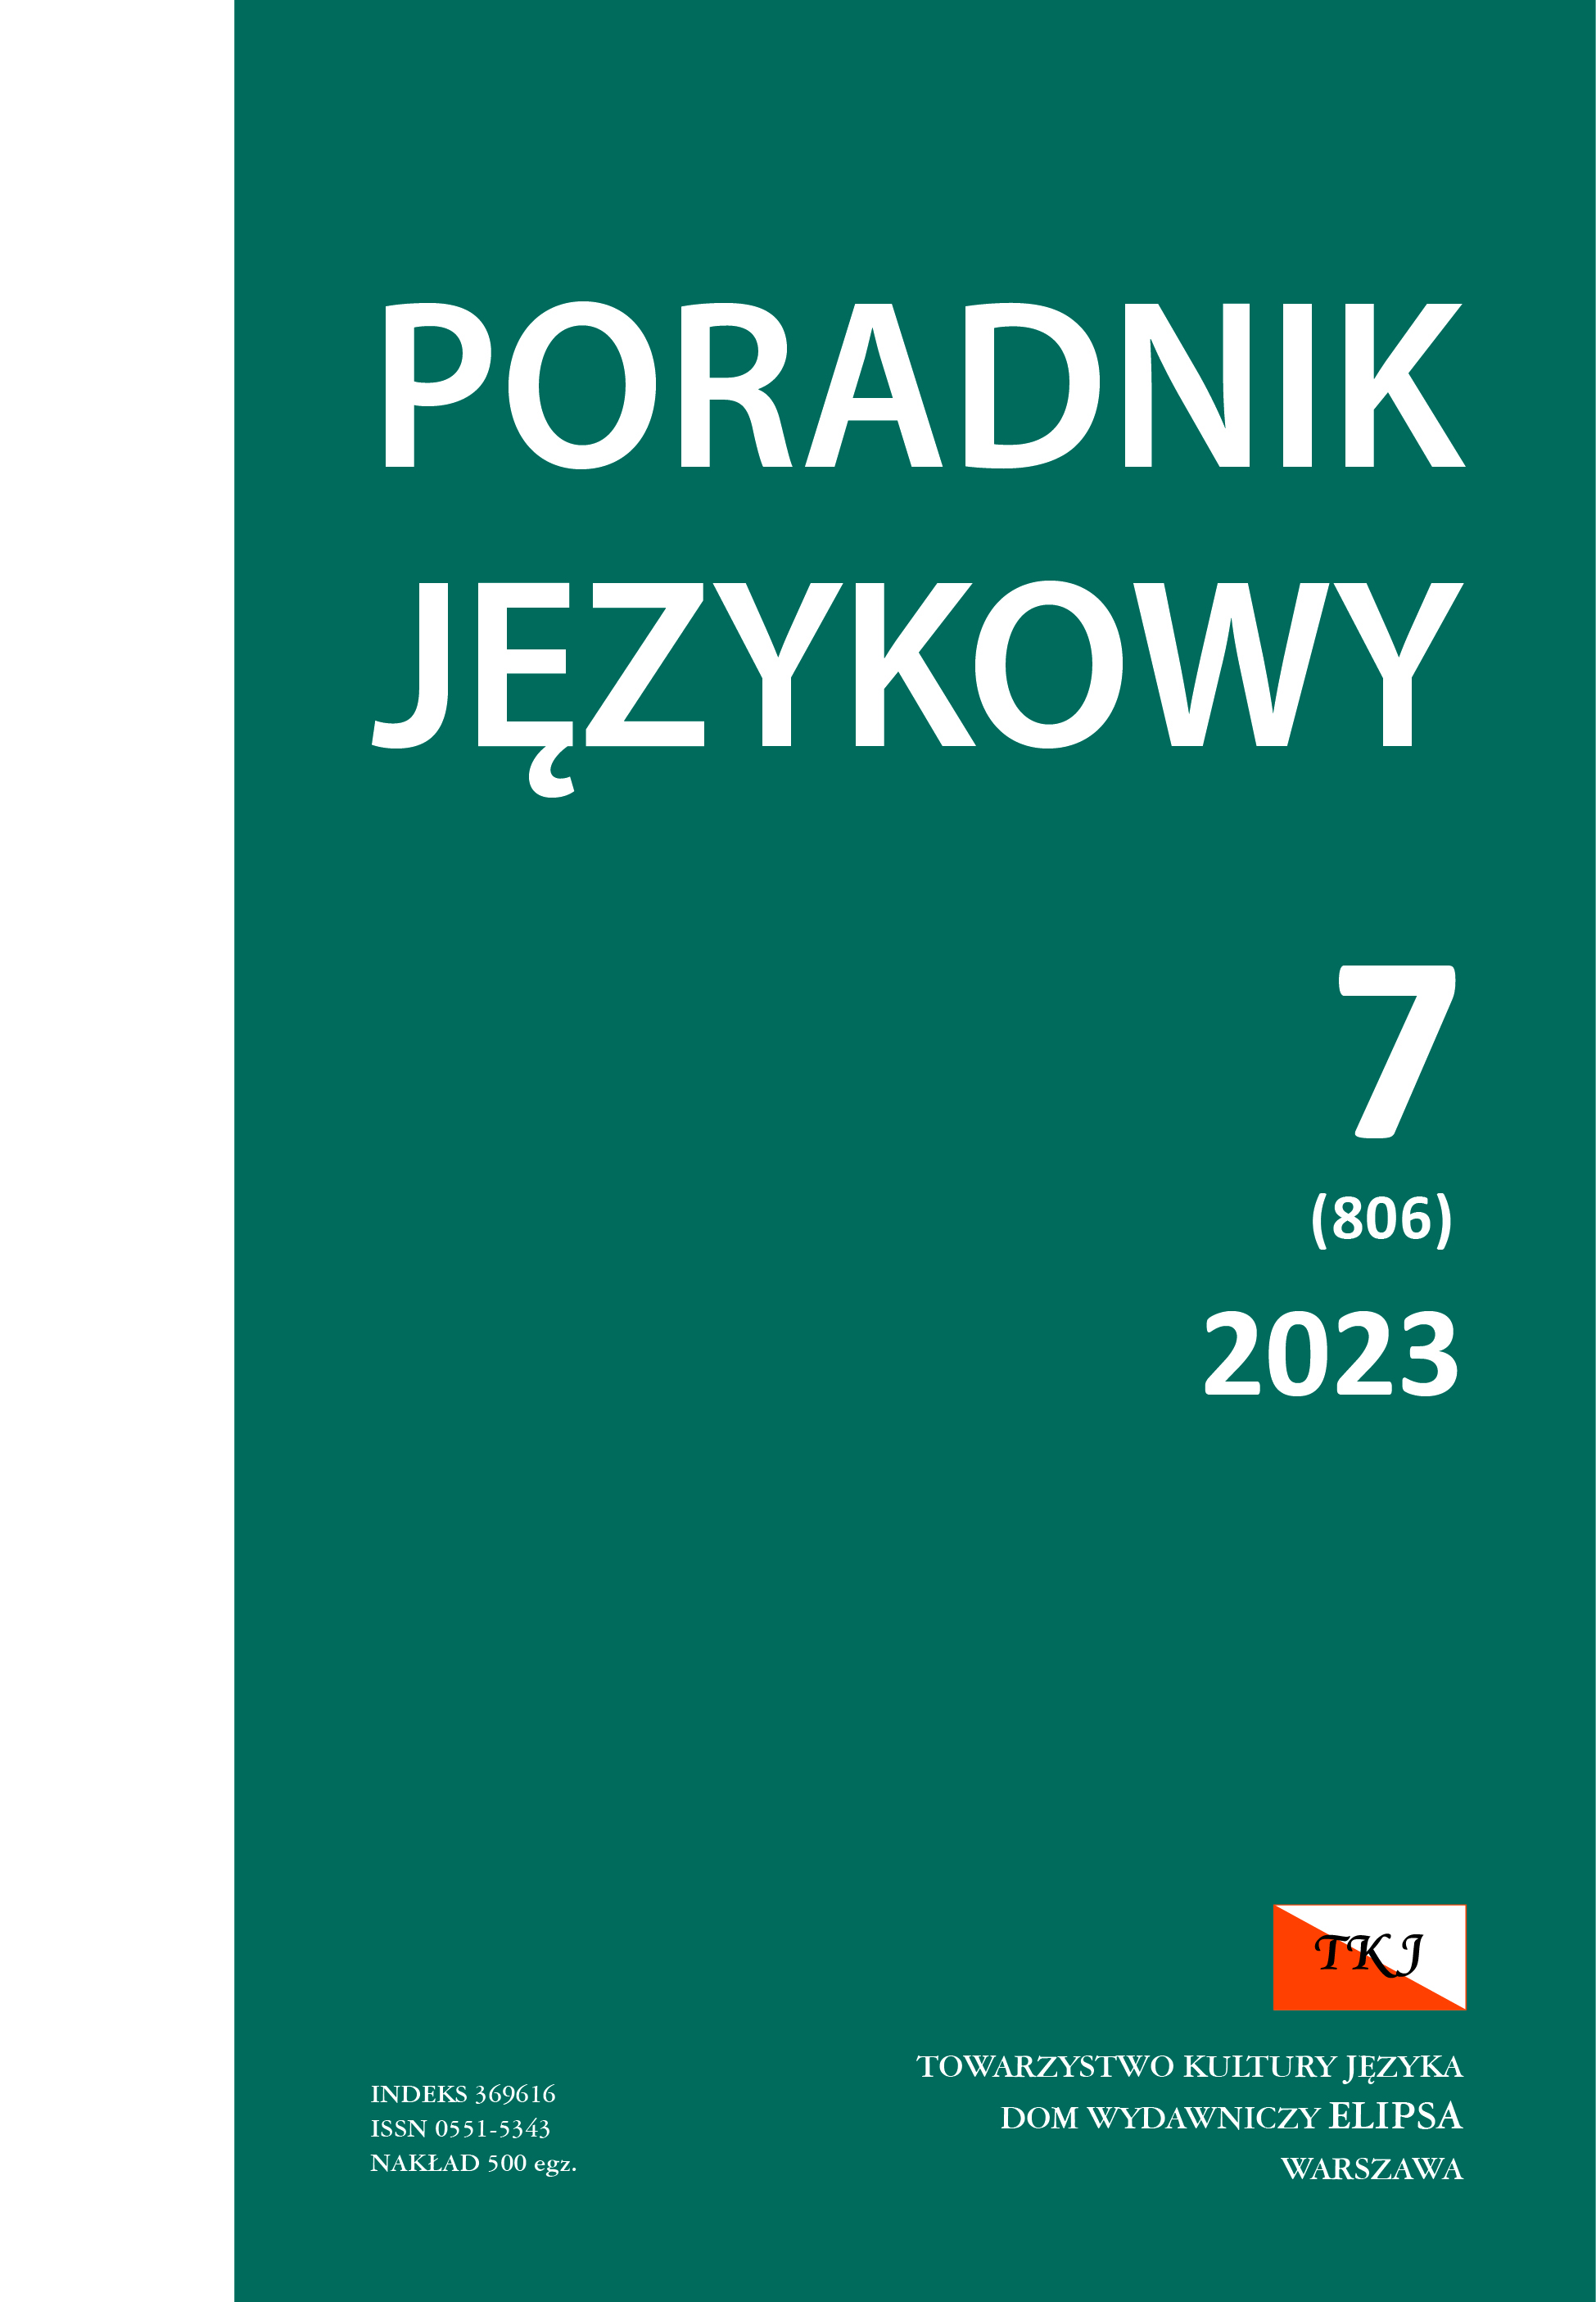 WILD BIRD NAMES IN OLD AND CONTEMPORARY DIALECTOLOGICAL MATERIAL FROM GREATER POLAND Cover Image